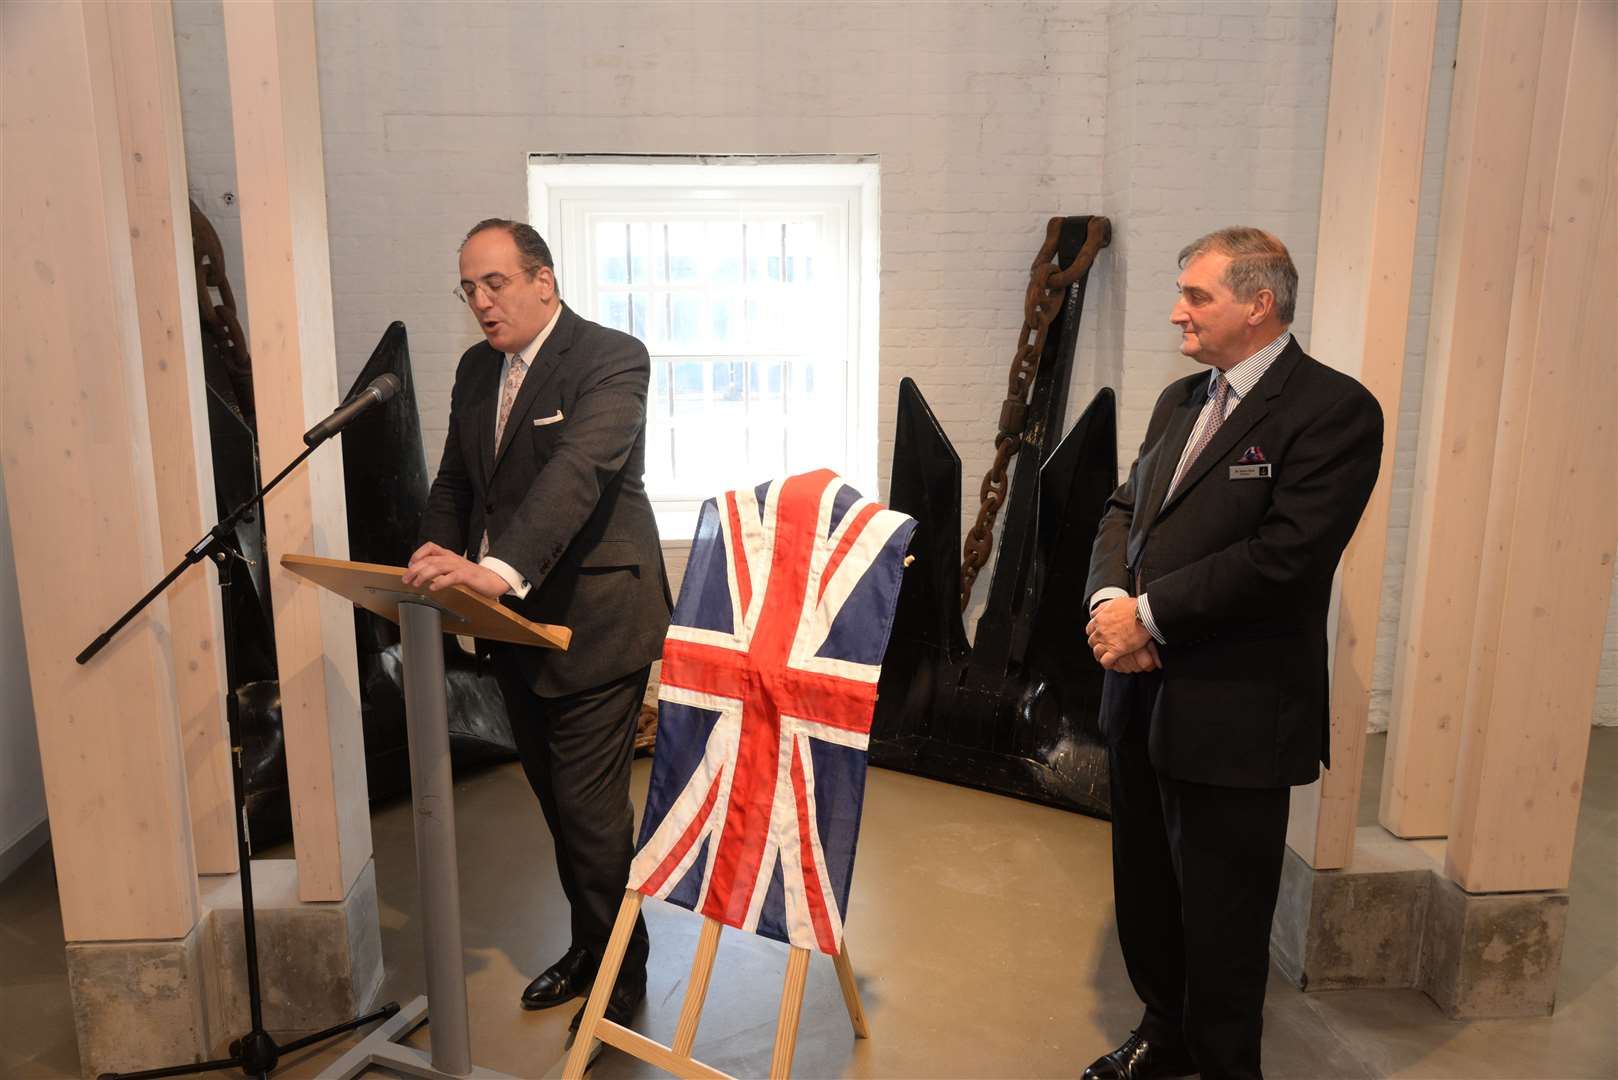 In October 2018, tourism minister Michael Ellis opened the building with trust chairman Admiral Sir Trevor Soar